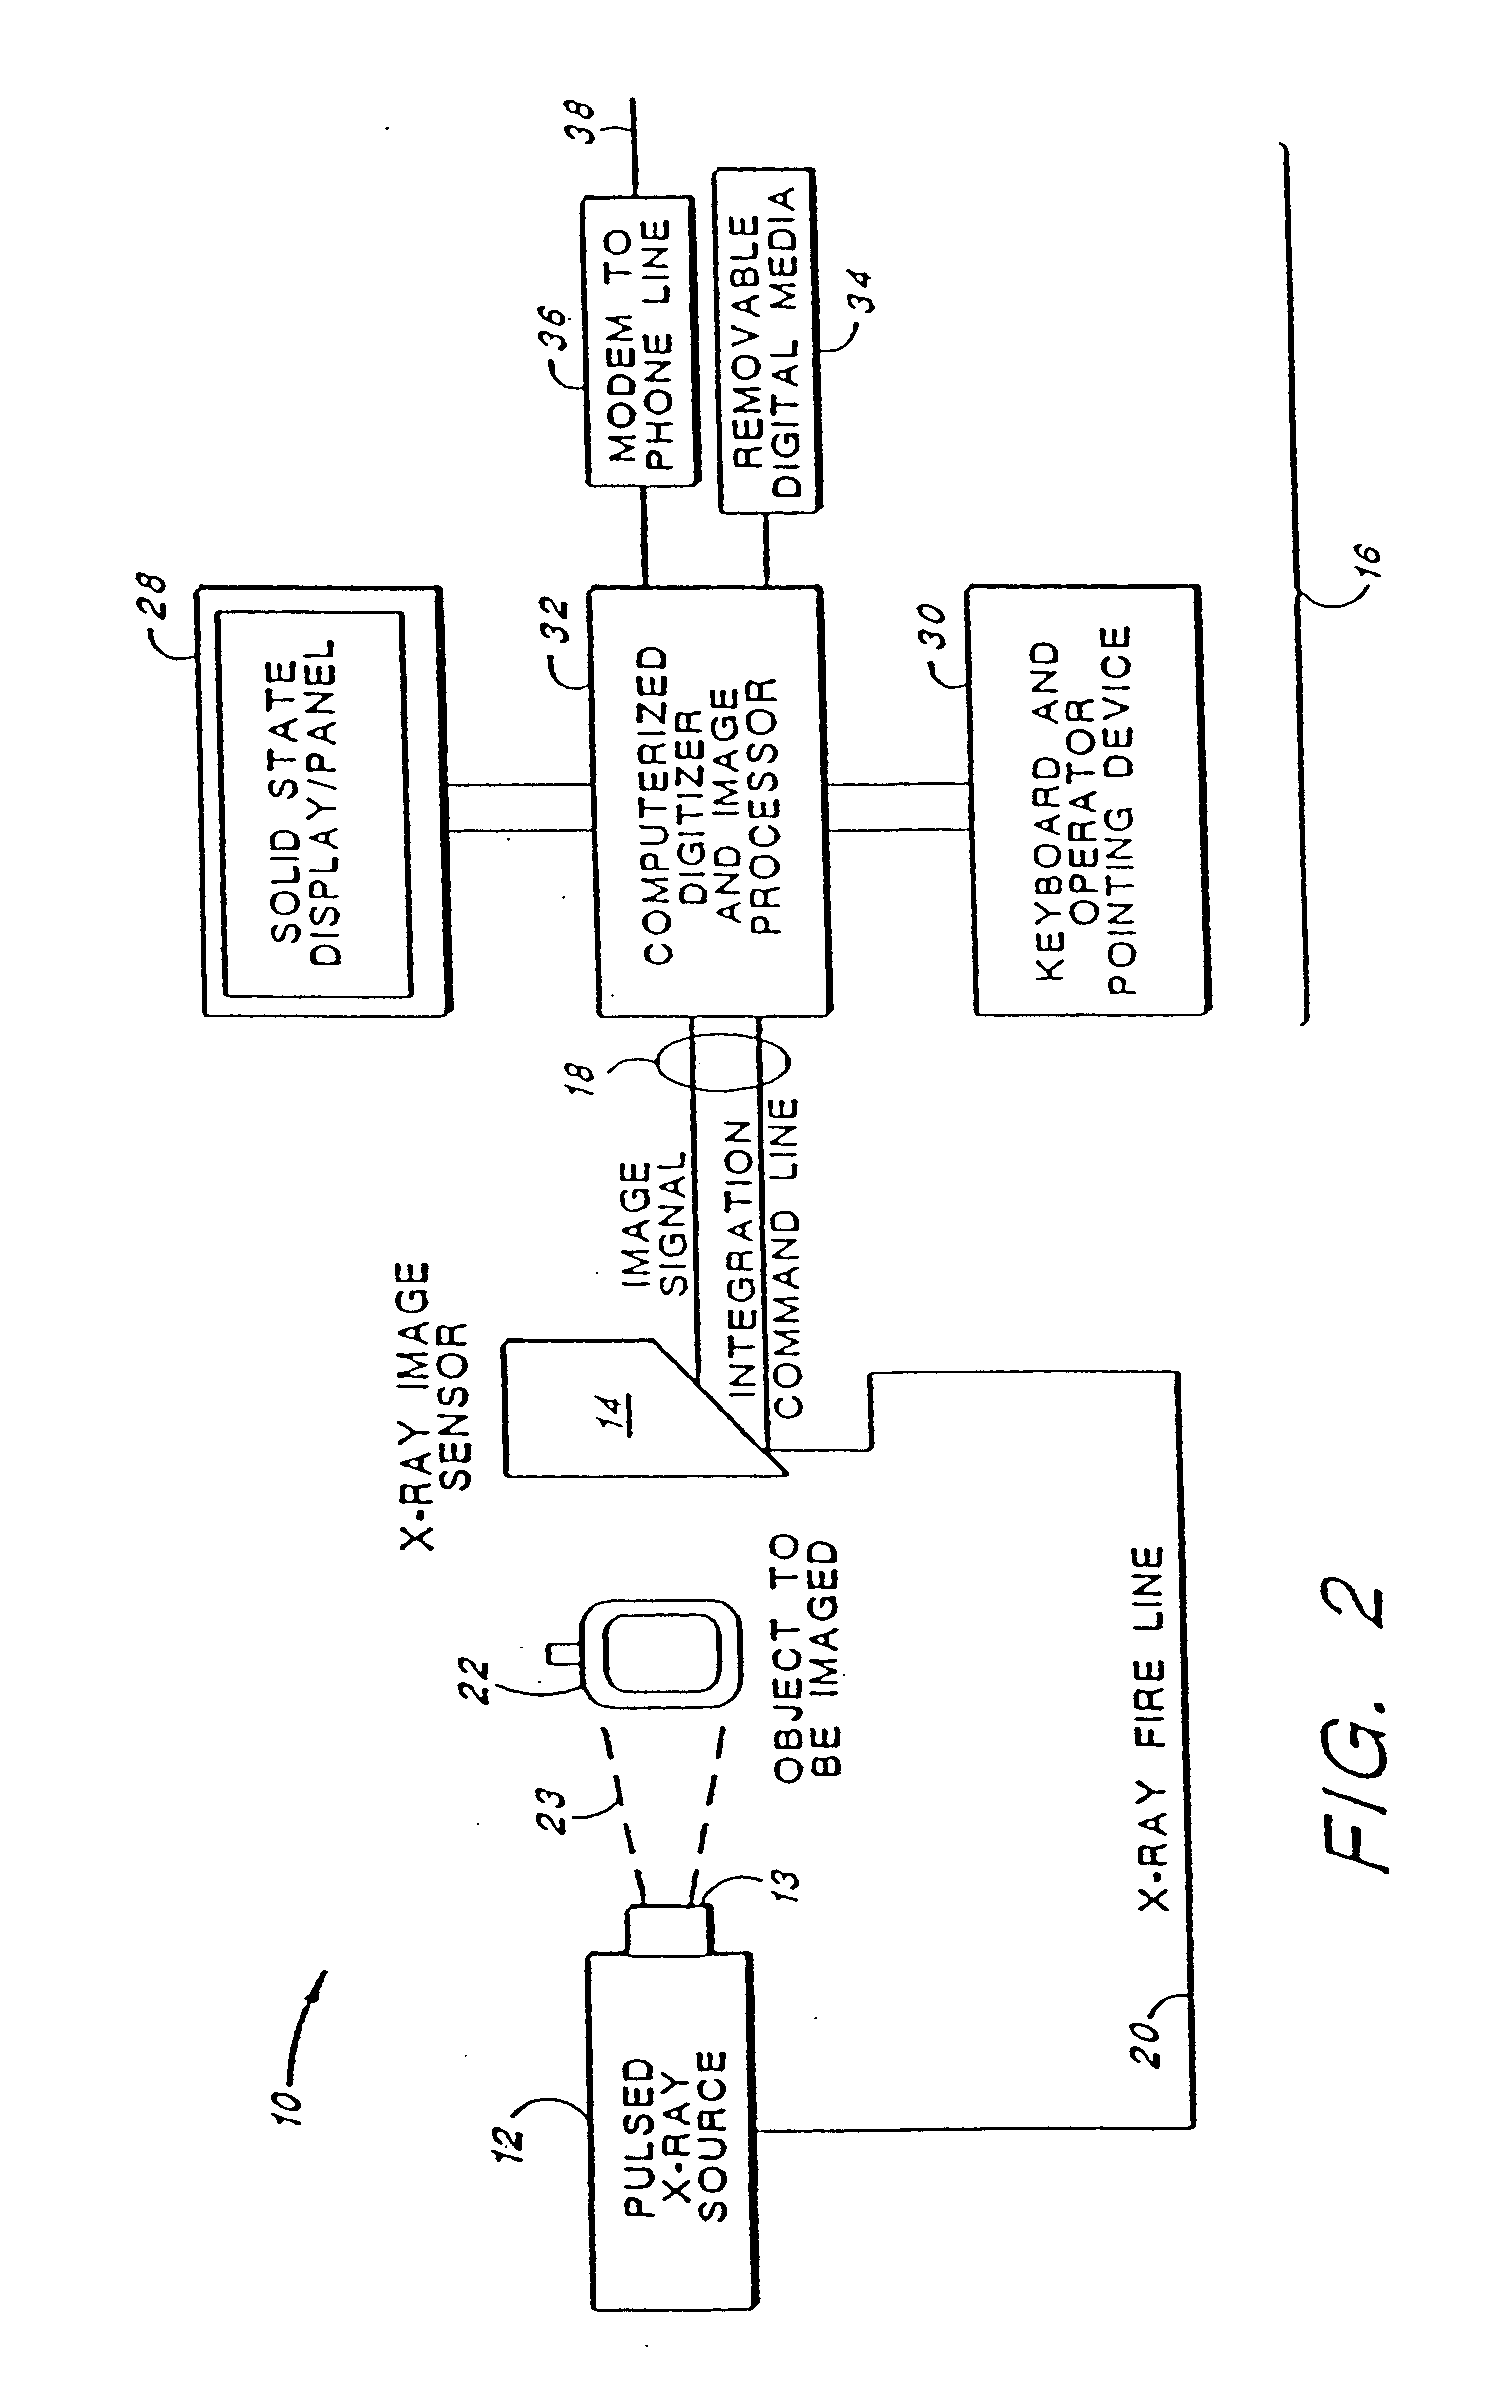 Portable, digital X-ray apparatus for producing, storing, and displaying electronic radioscopic images